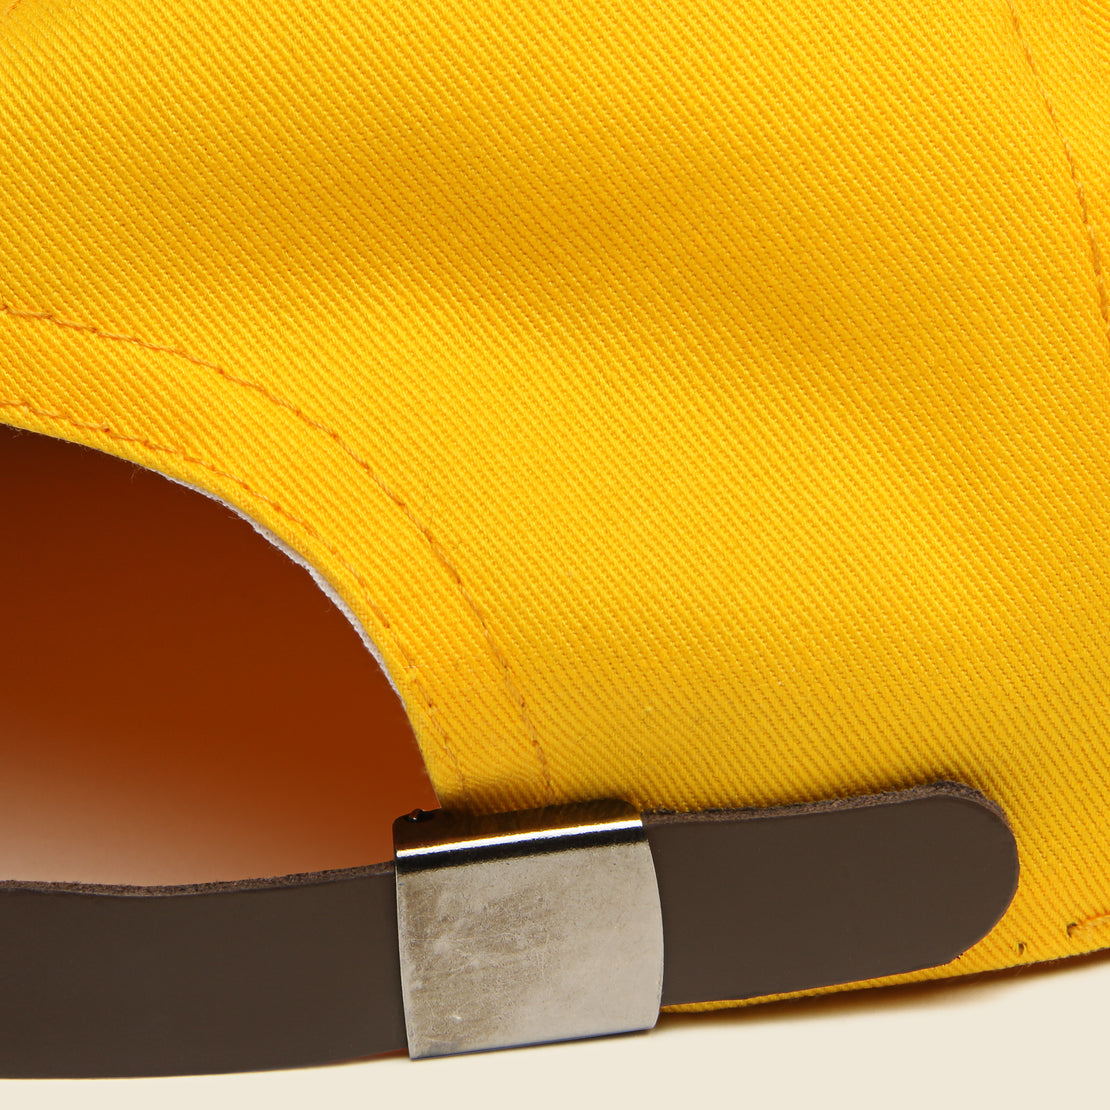 Amarillo Gold Sox Cotton Hat - Yellow - Ebbets Field Flannels - STAG Provisions - Accessories - Hats